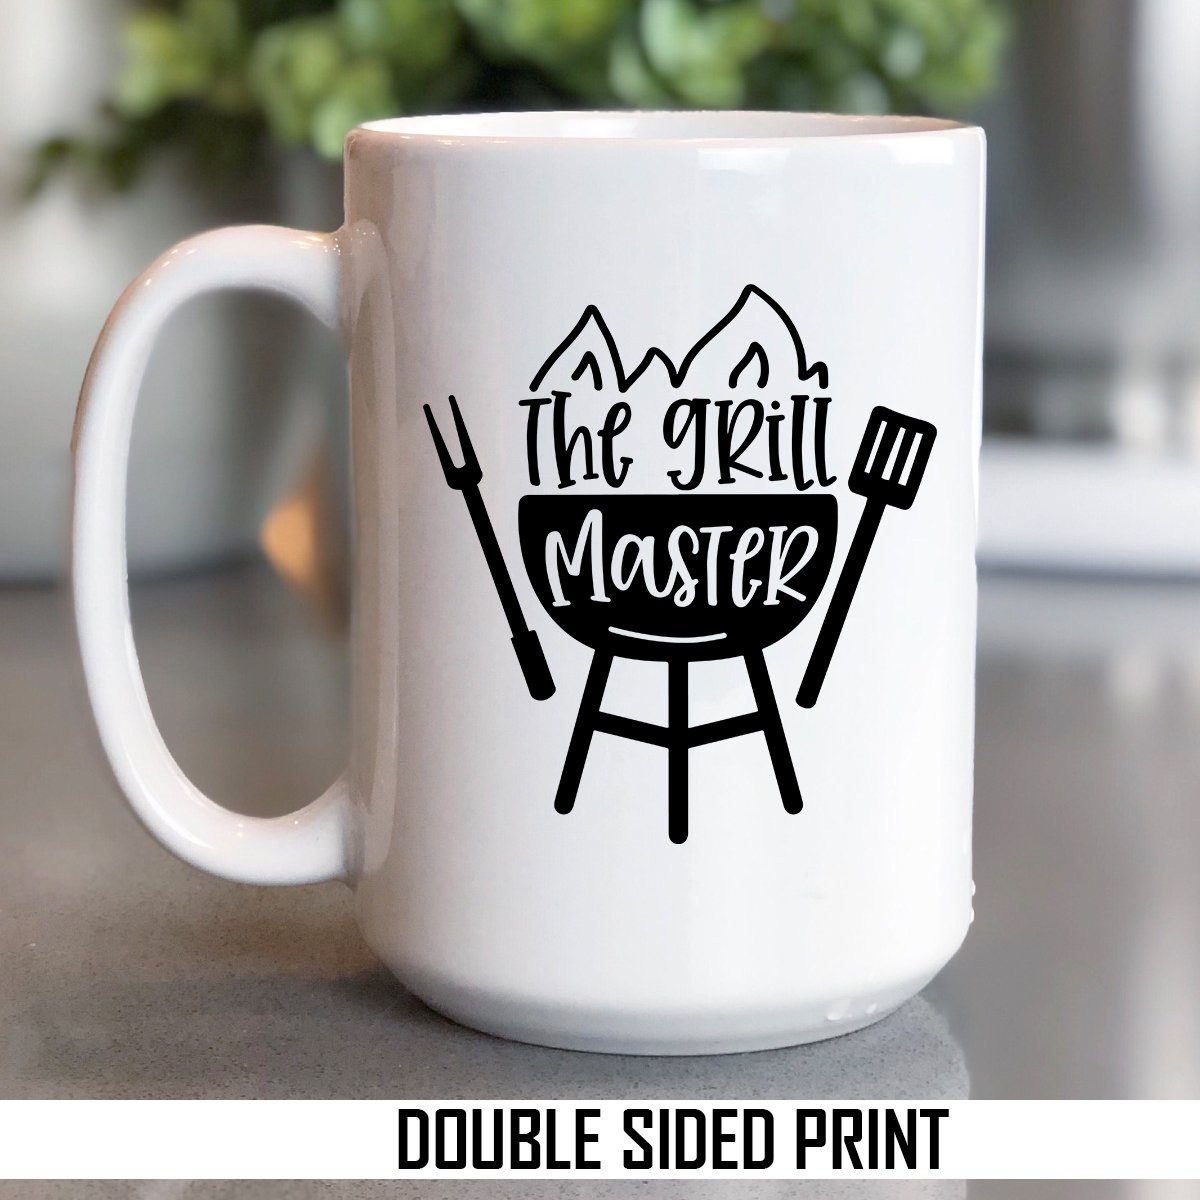 The Grill Master Double Sided Printed Mug